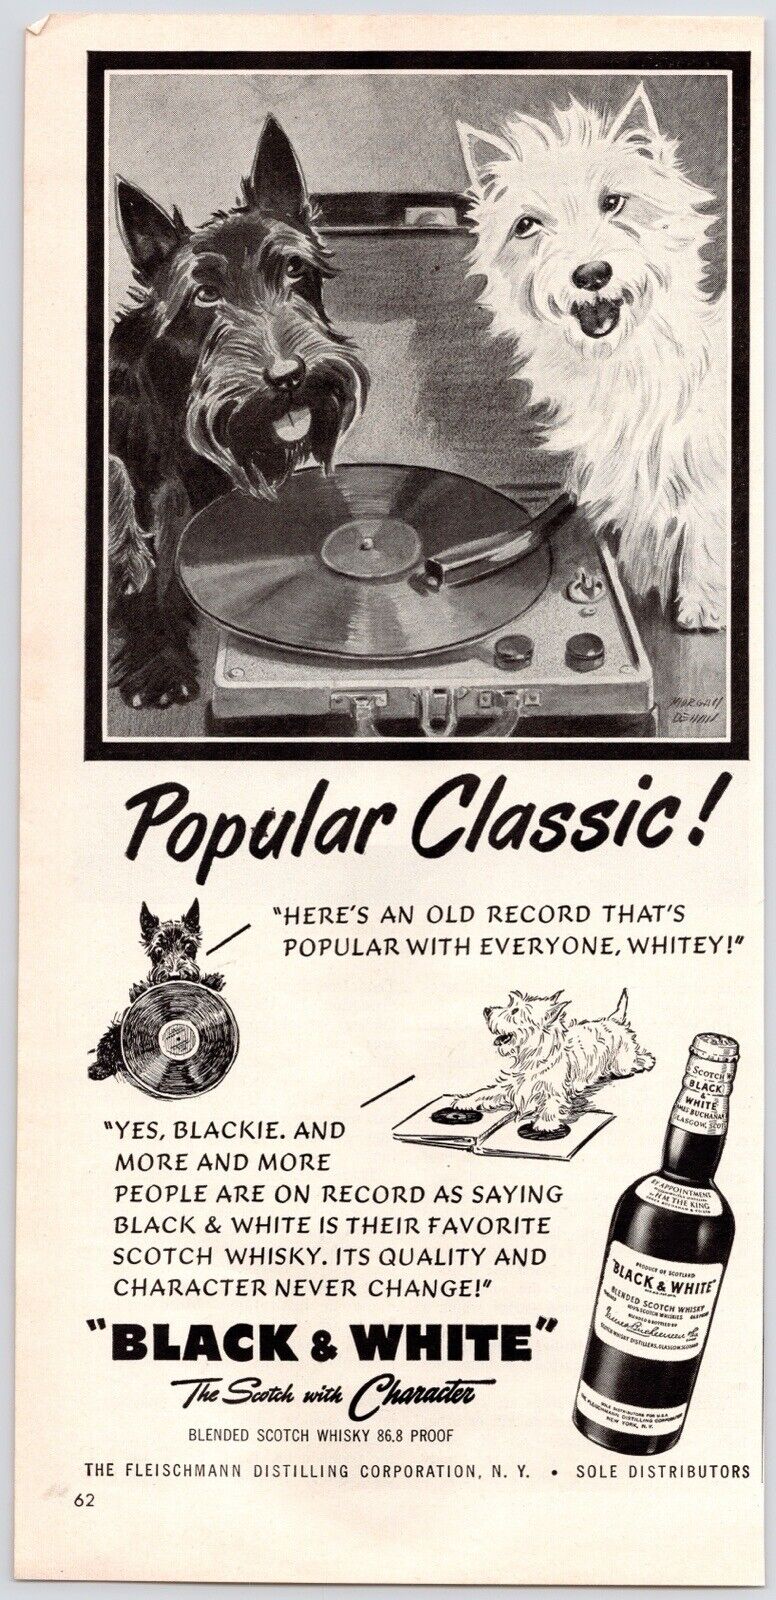 1950s~Black & White~Scotch Whisky~Scotties~Dogs~Playing Records~Vintage Print Ad